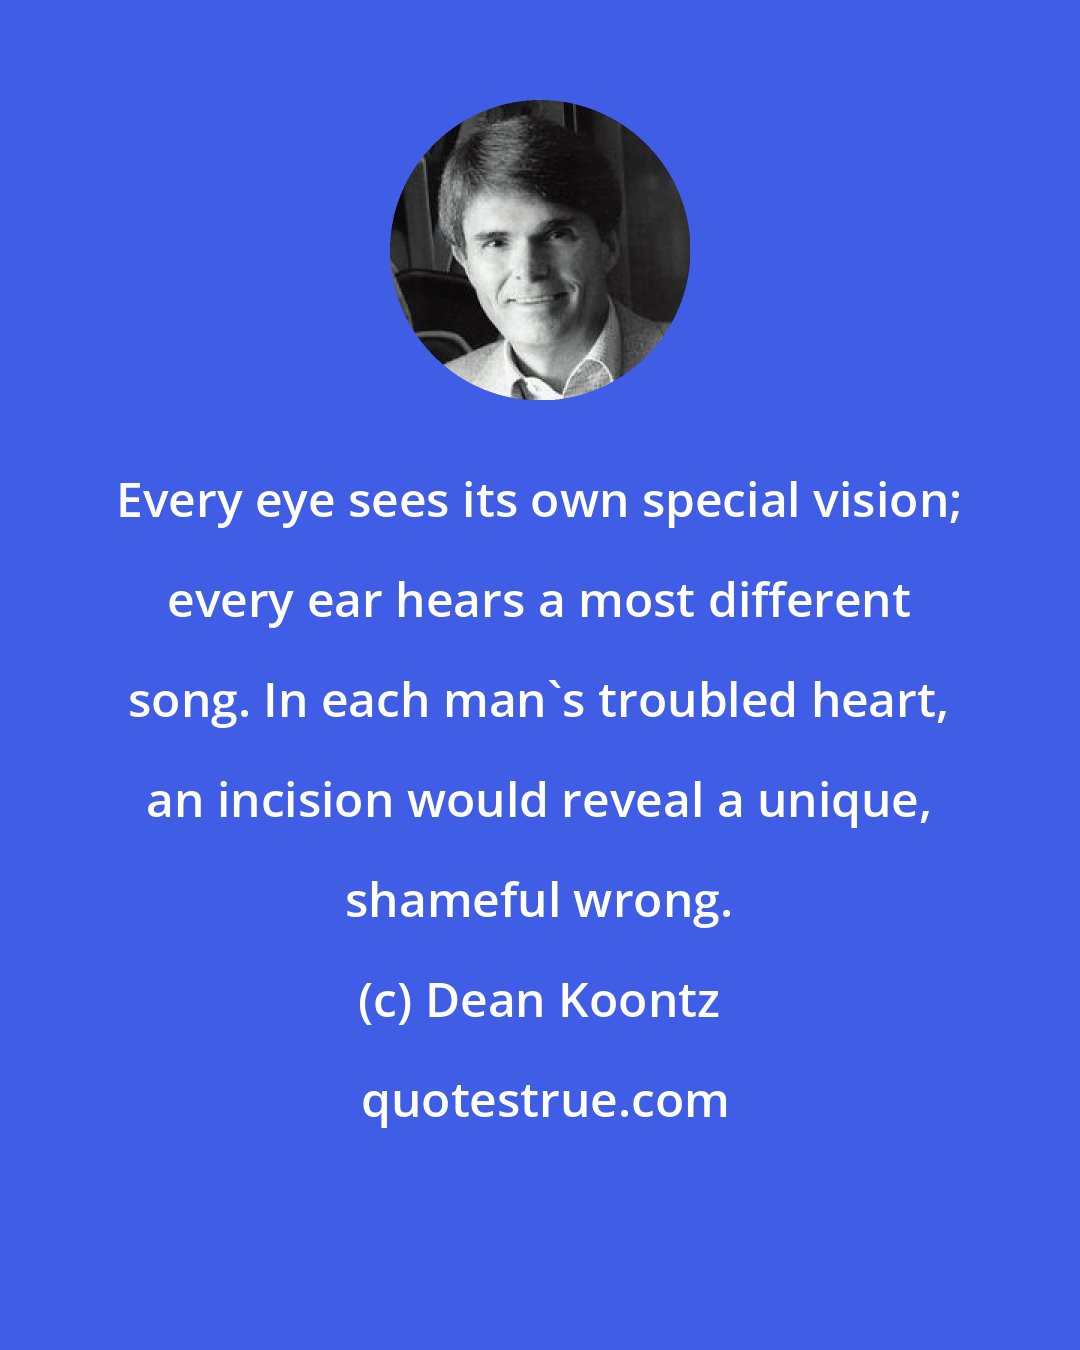 Dean Koontz: Every eye sees its own special vision; every ear hears a most different song. In each man's troubled heart, an incision would reveal a unique, shameful wrong.